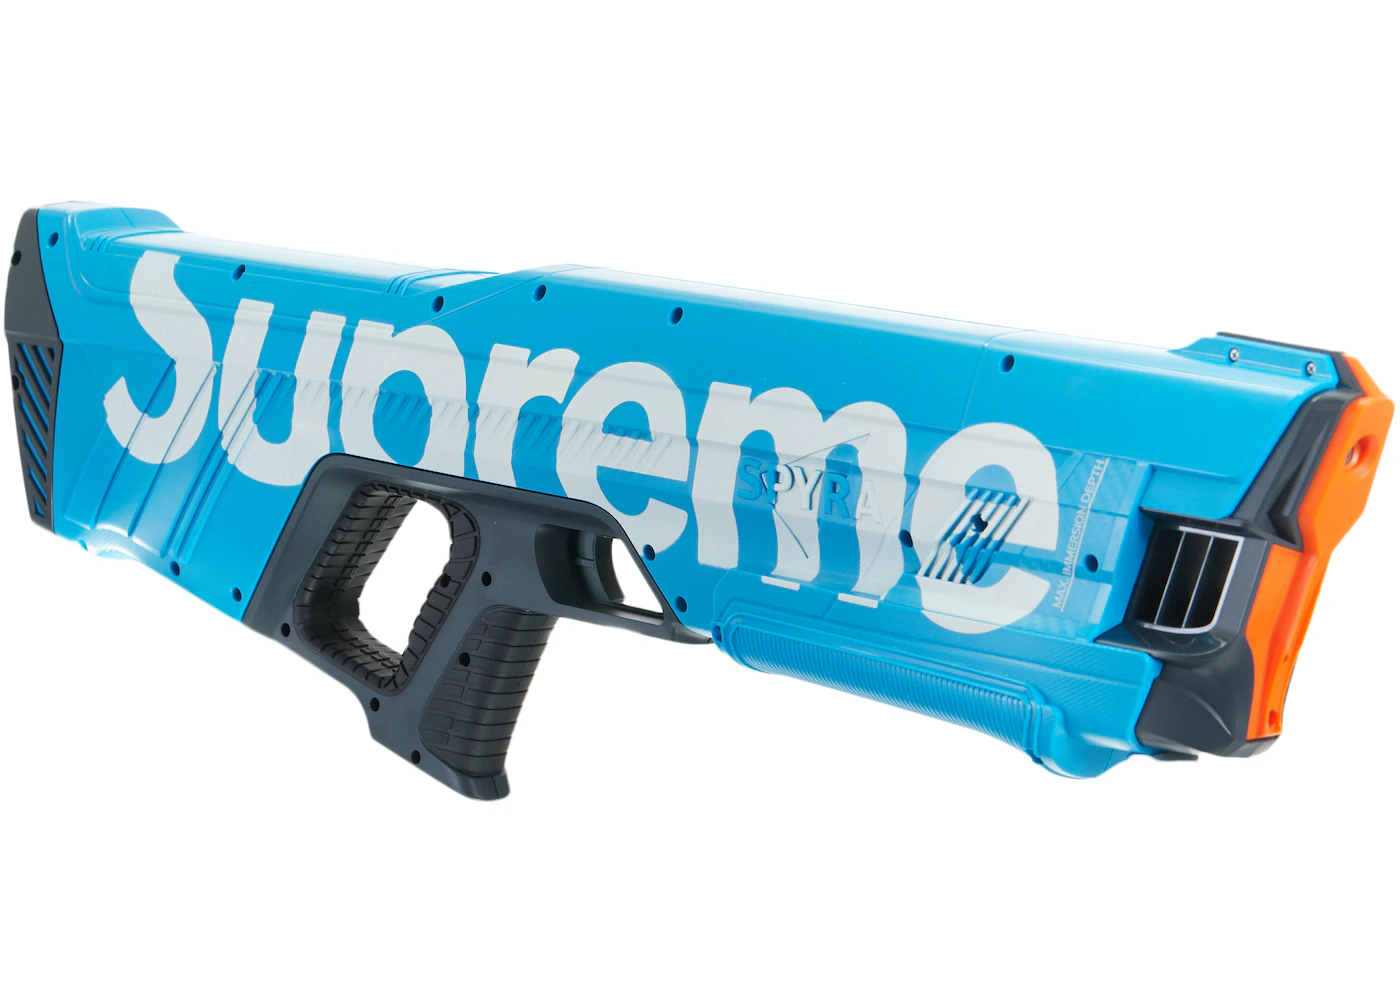 Supreme x Spyra Two Limited Edition Water Blaster Blue